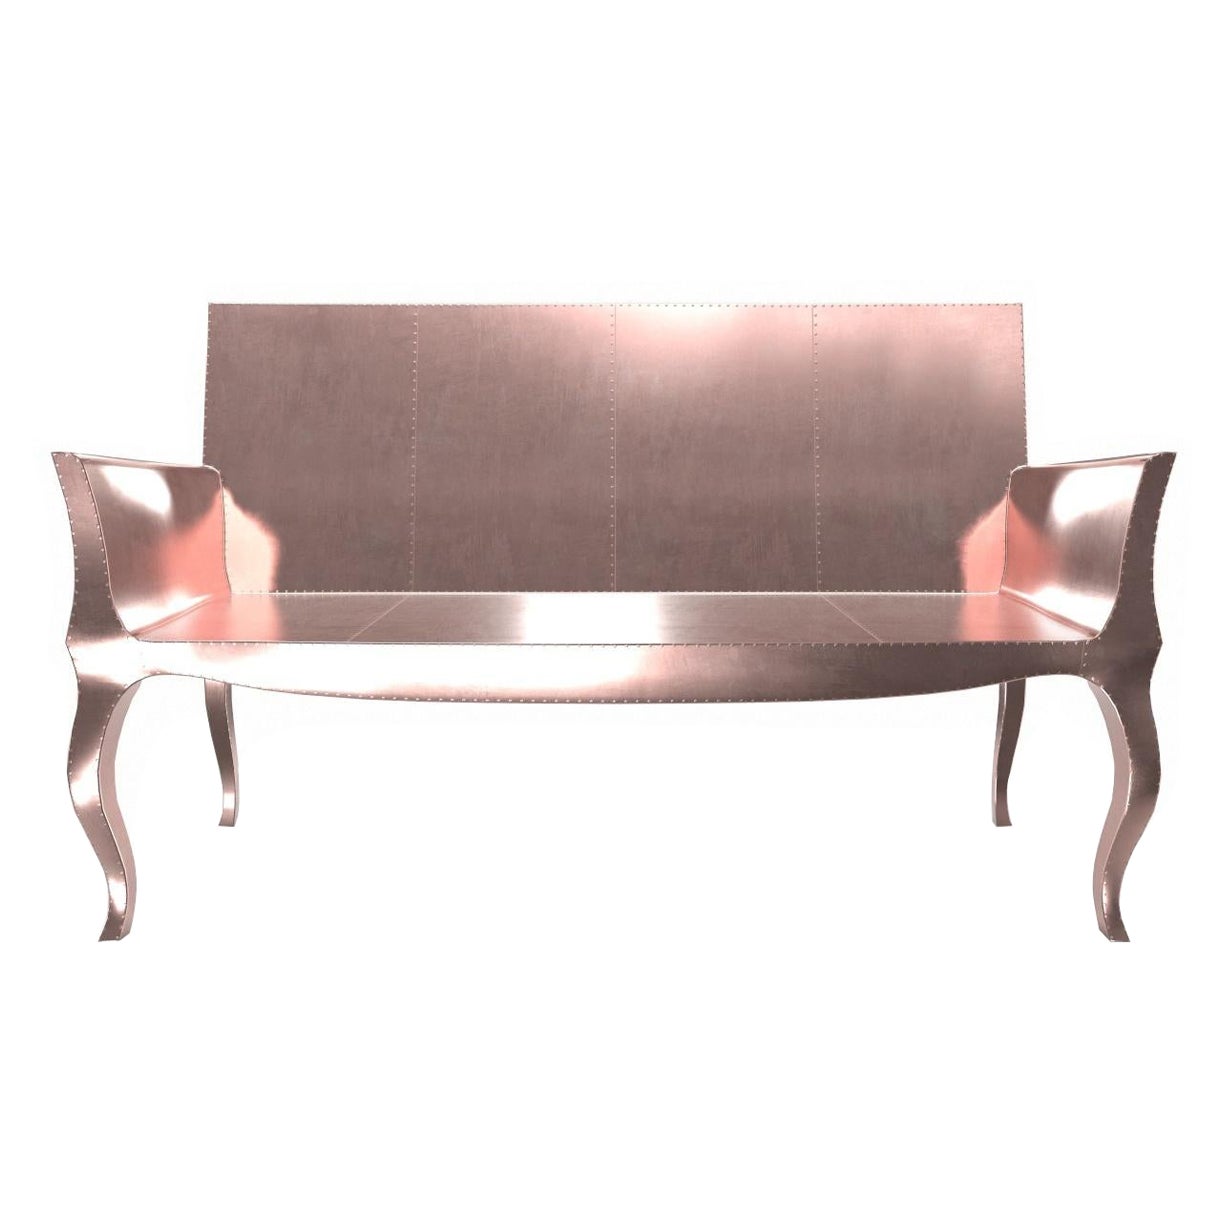 Louise Settee Art Deco Benches in Smooth Copper by Paul Mathieu for S Odegard